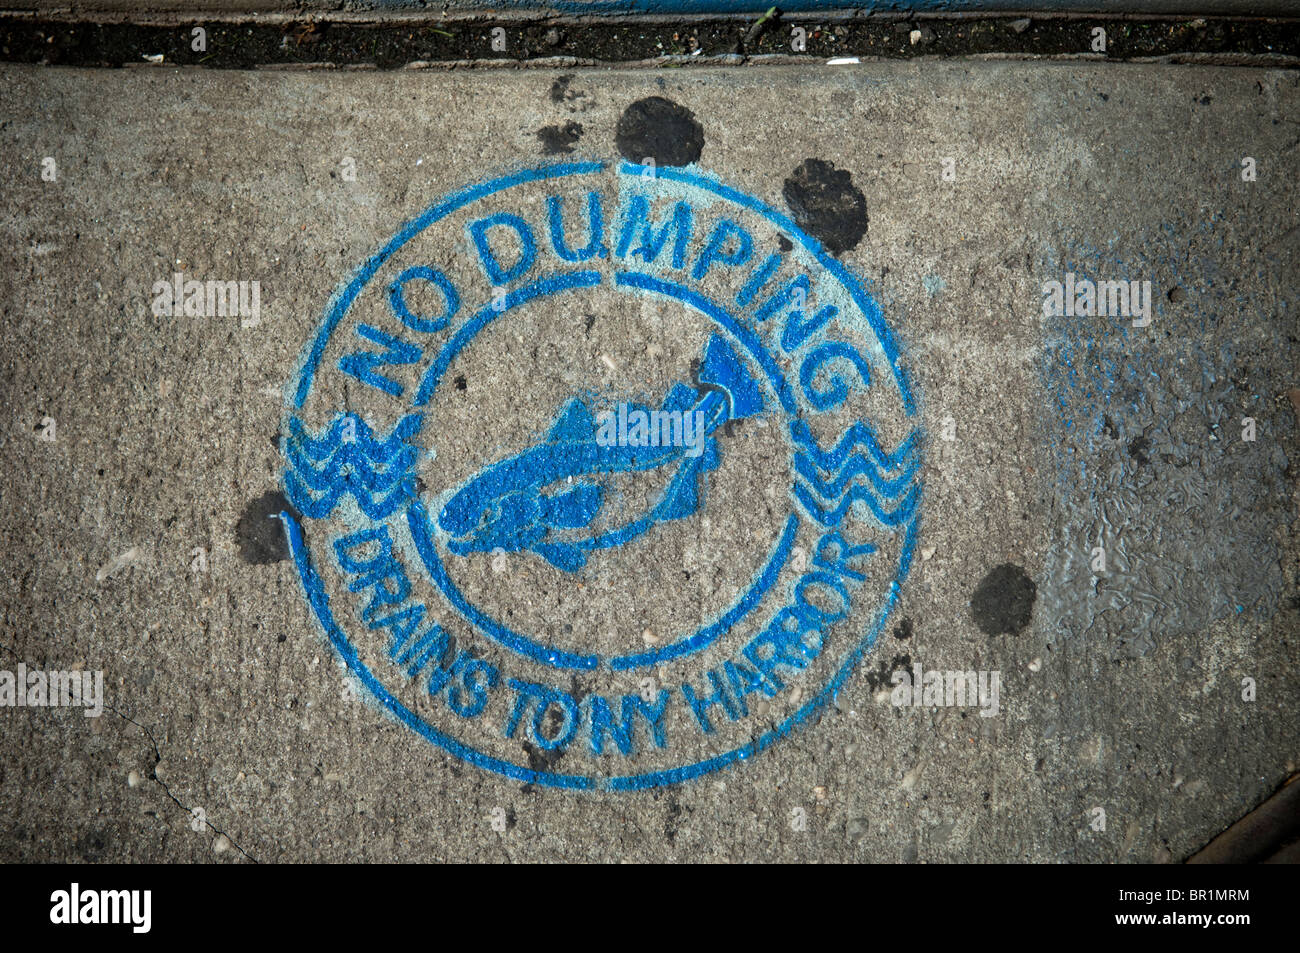 A warning sign, No dumping, drains to New York harbor, seen on sidewalk near storm drain in Chinatown in Manhattan Stock Photo